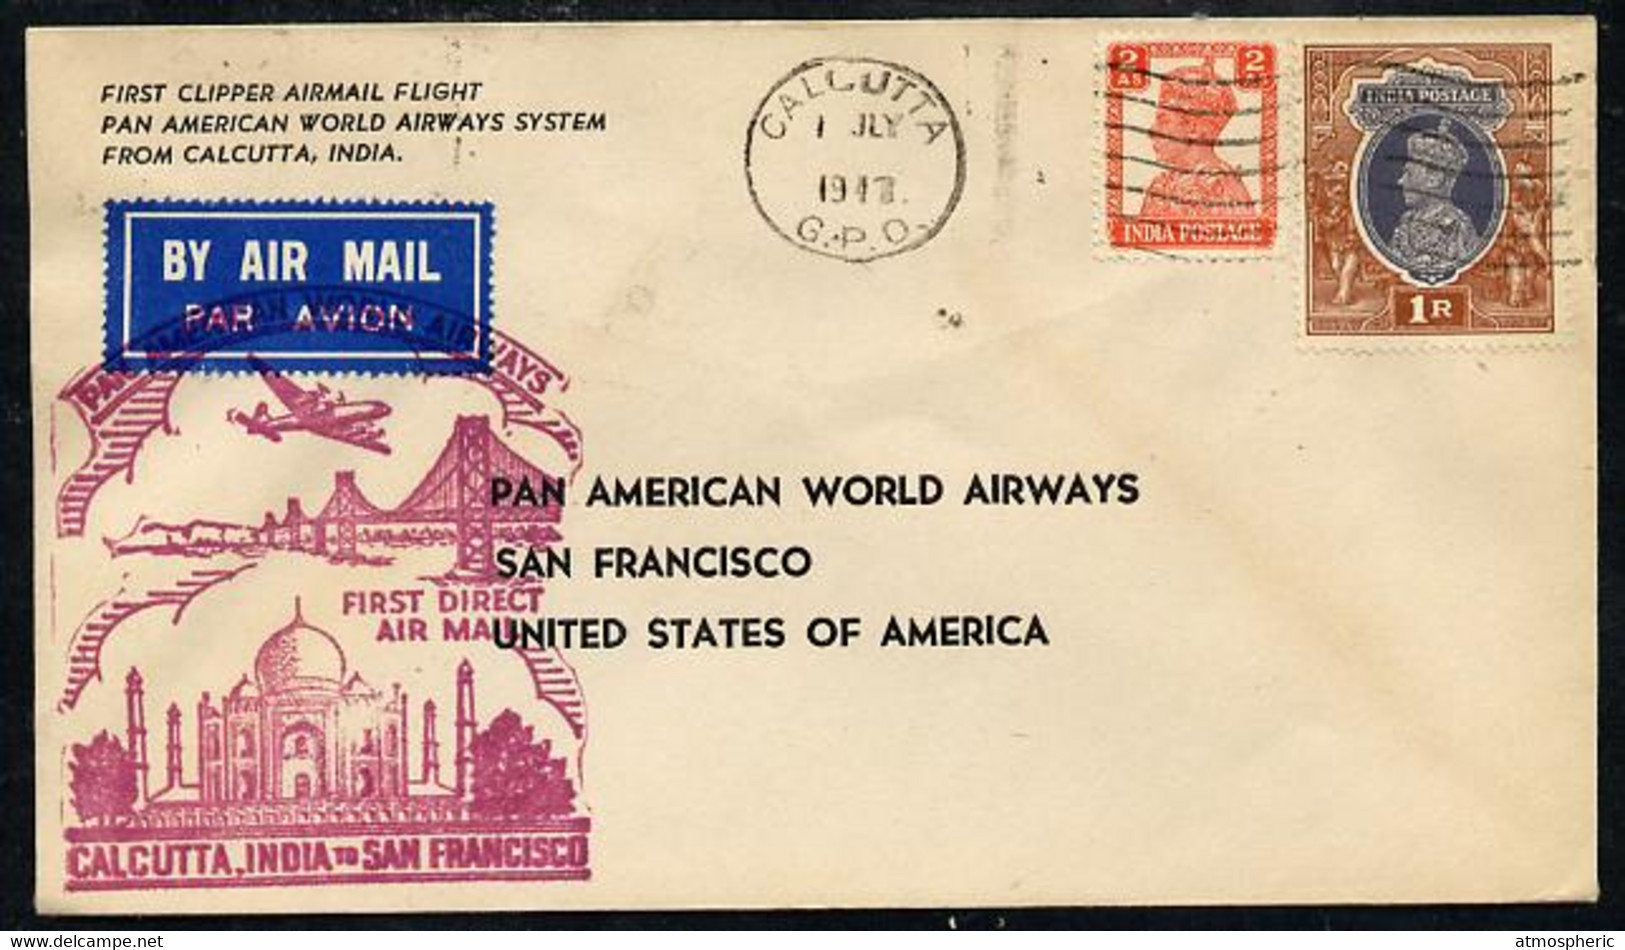 India 1947 Pan American Airways First Clipper Air Mail Flight Cover To USA With Special 'Calcutta To San Francisco' - Kirnitzschtal